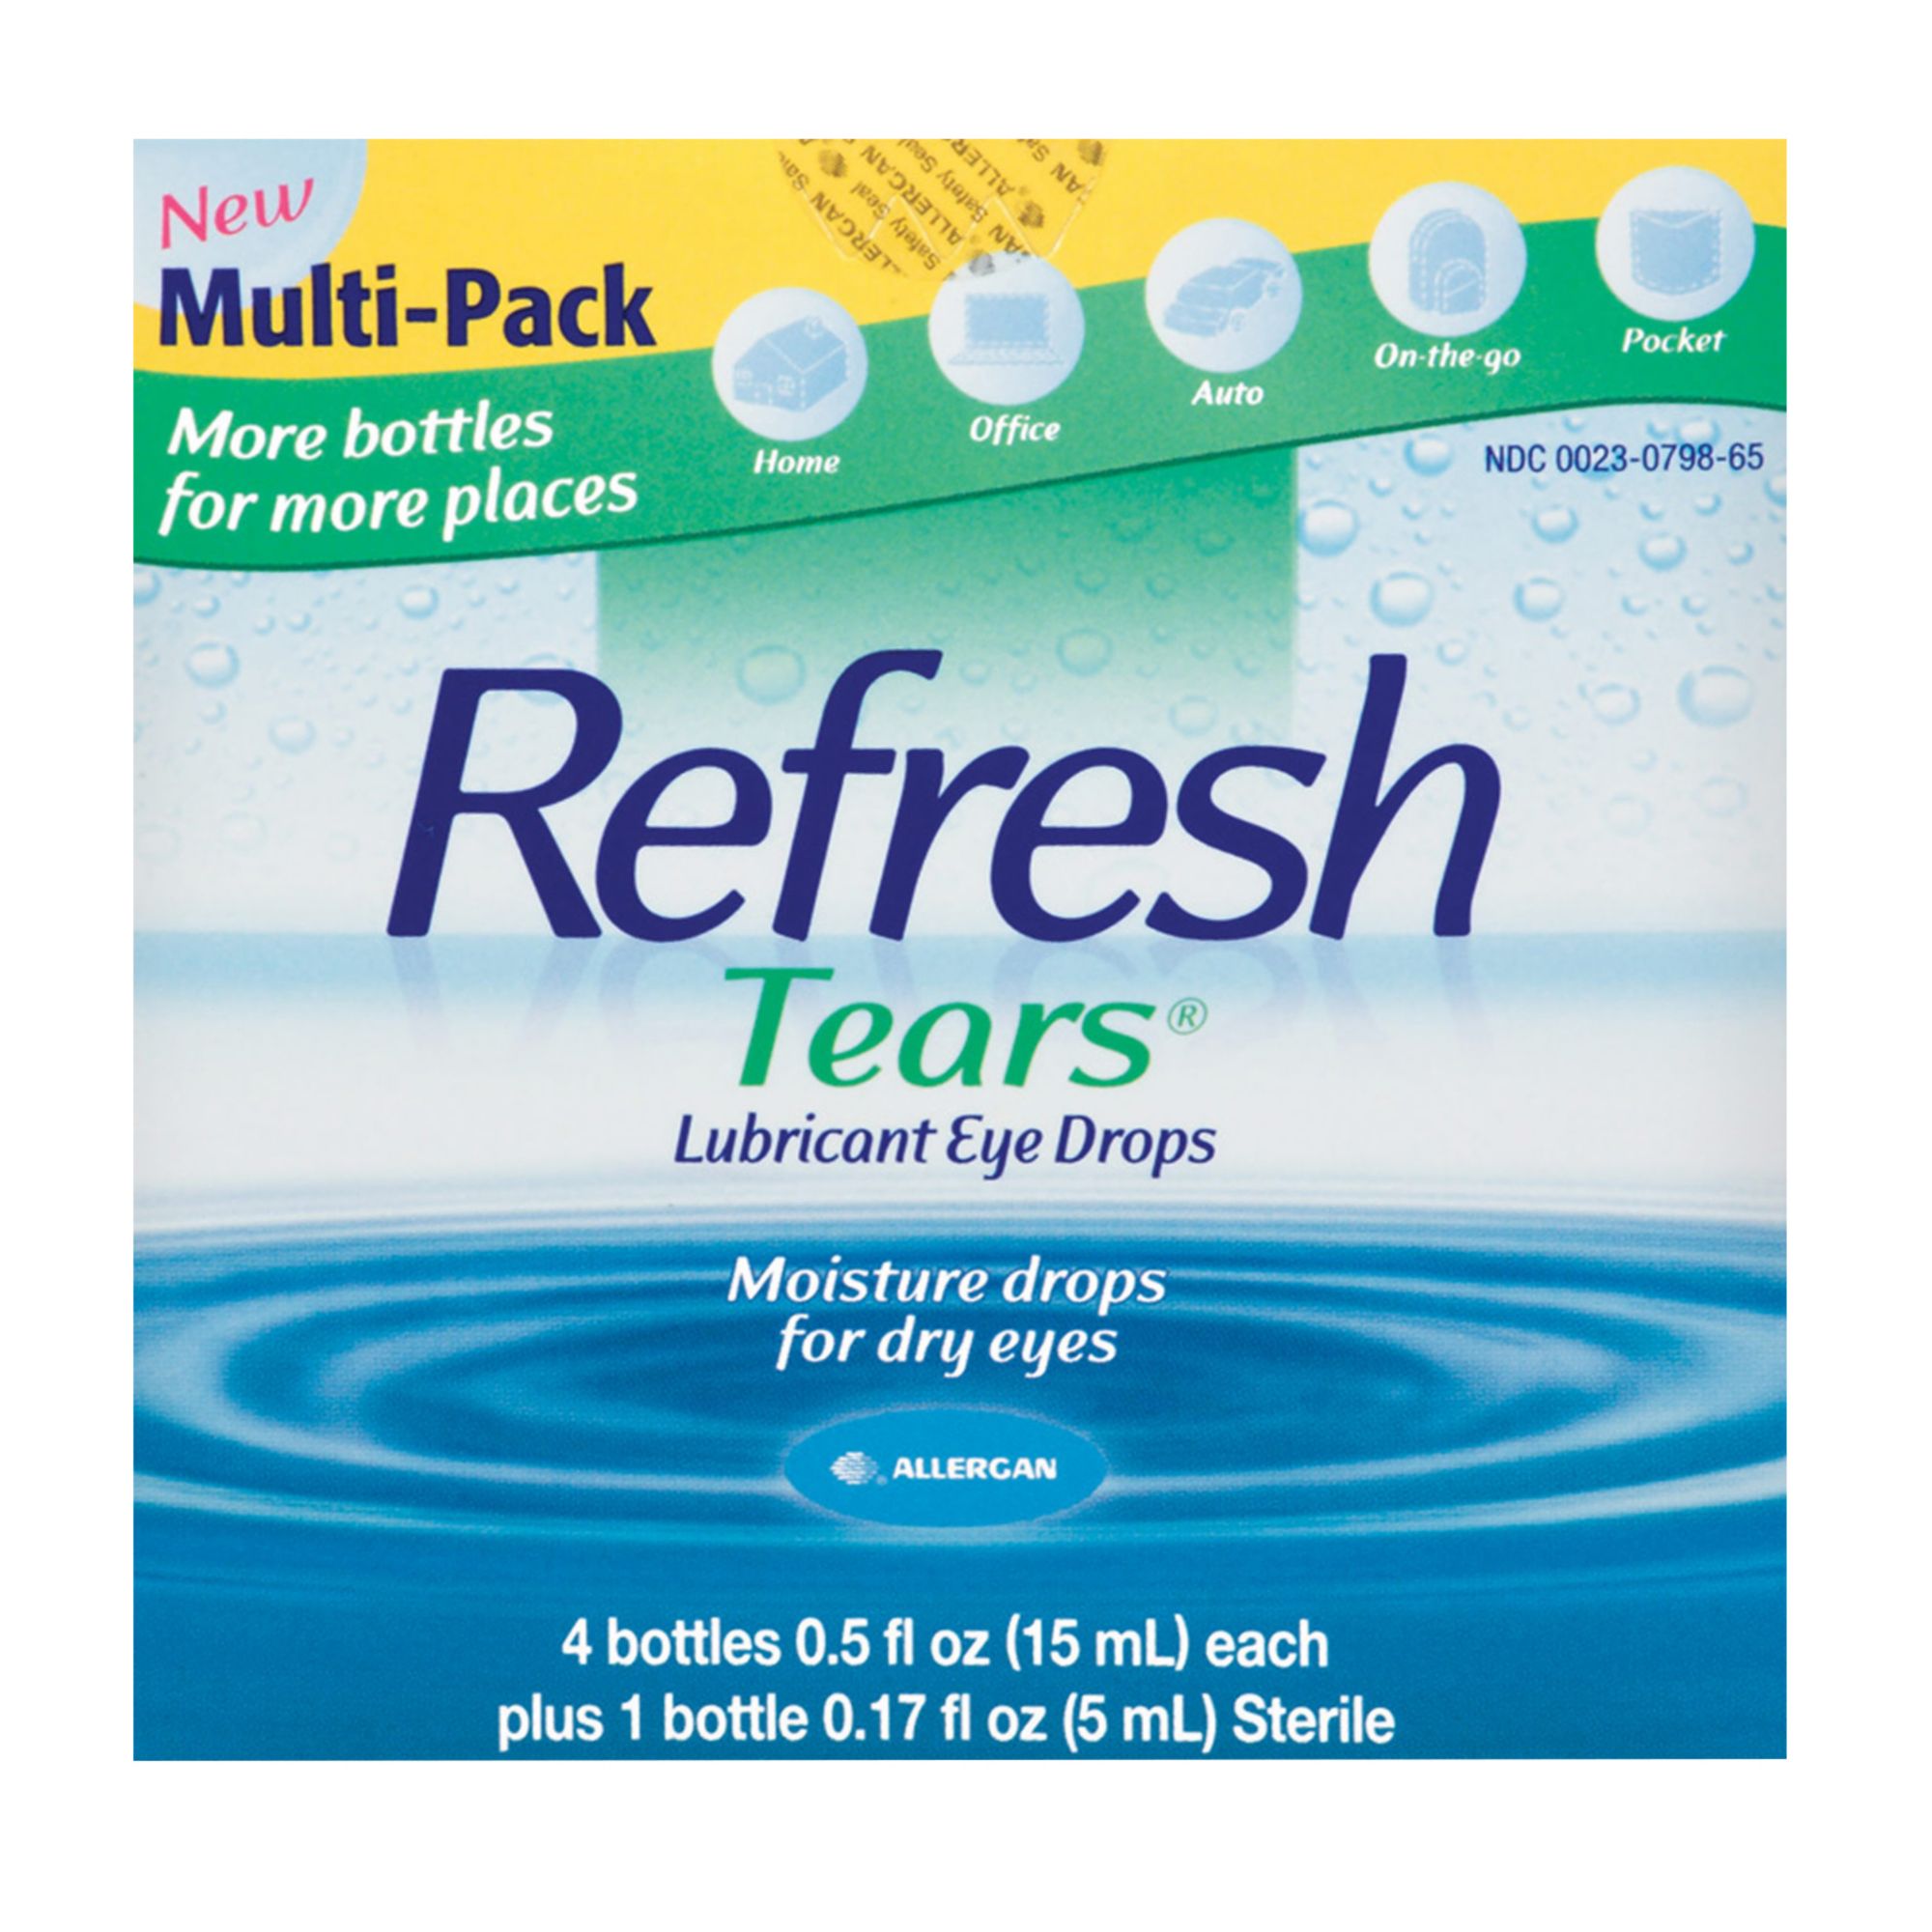 Clear Eyes Contact Lens Relief Eye Drops, 0.5 Fl Oz 0.5 Fl Oz (Pack of 1)